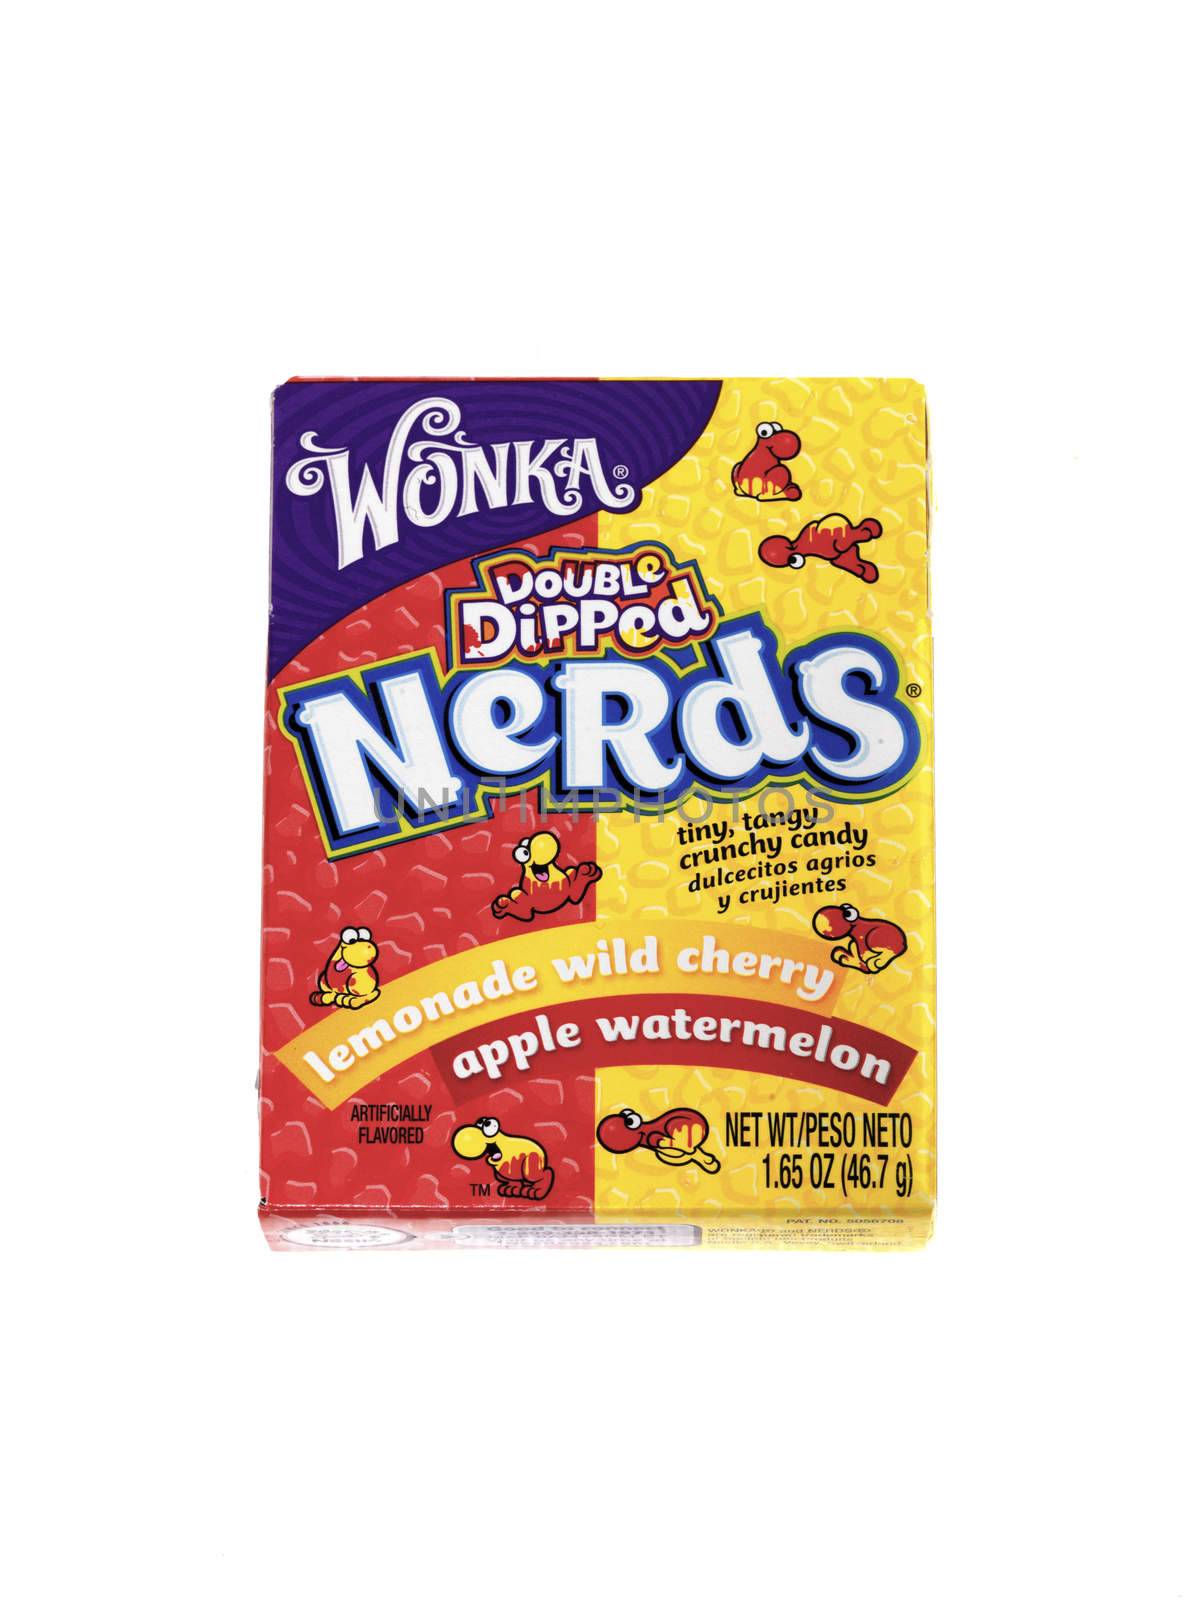 Box of Double Dipped Nerds